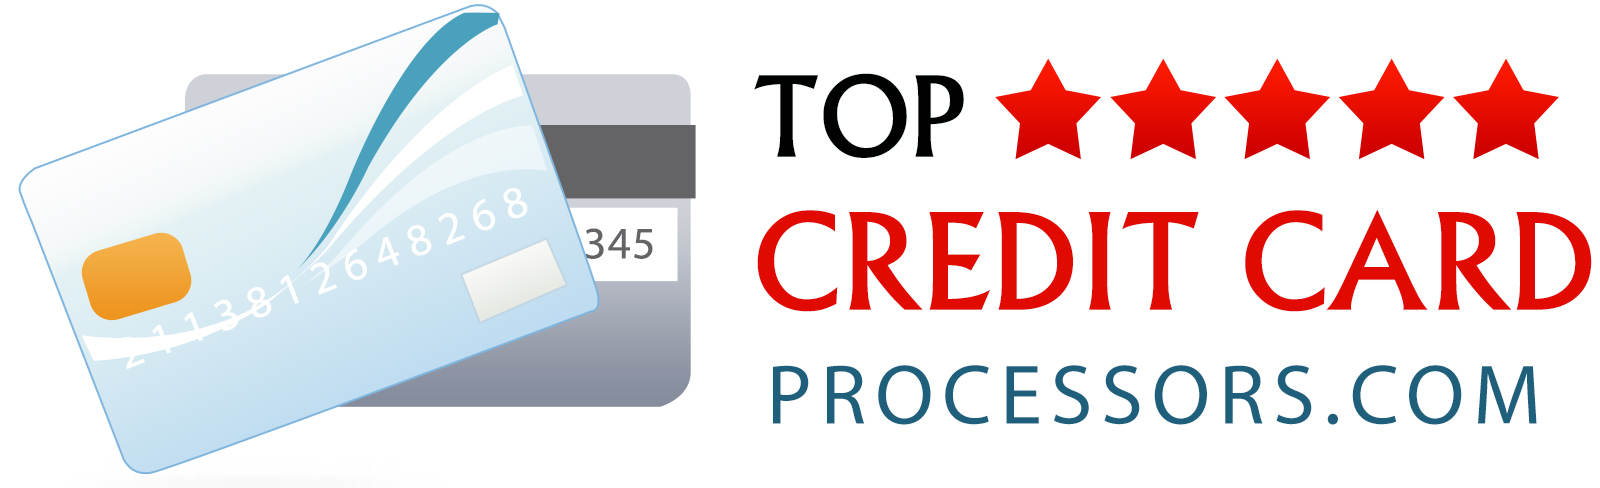 S & S Bank Card Systems Named Best High Risk Processing Company by topcreditcardprocessors.com for September 2021